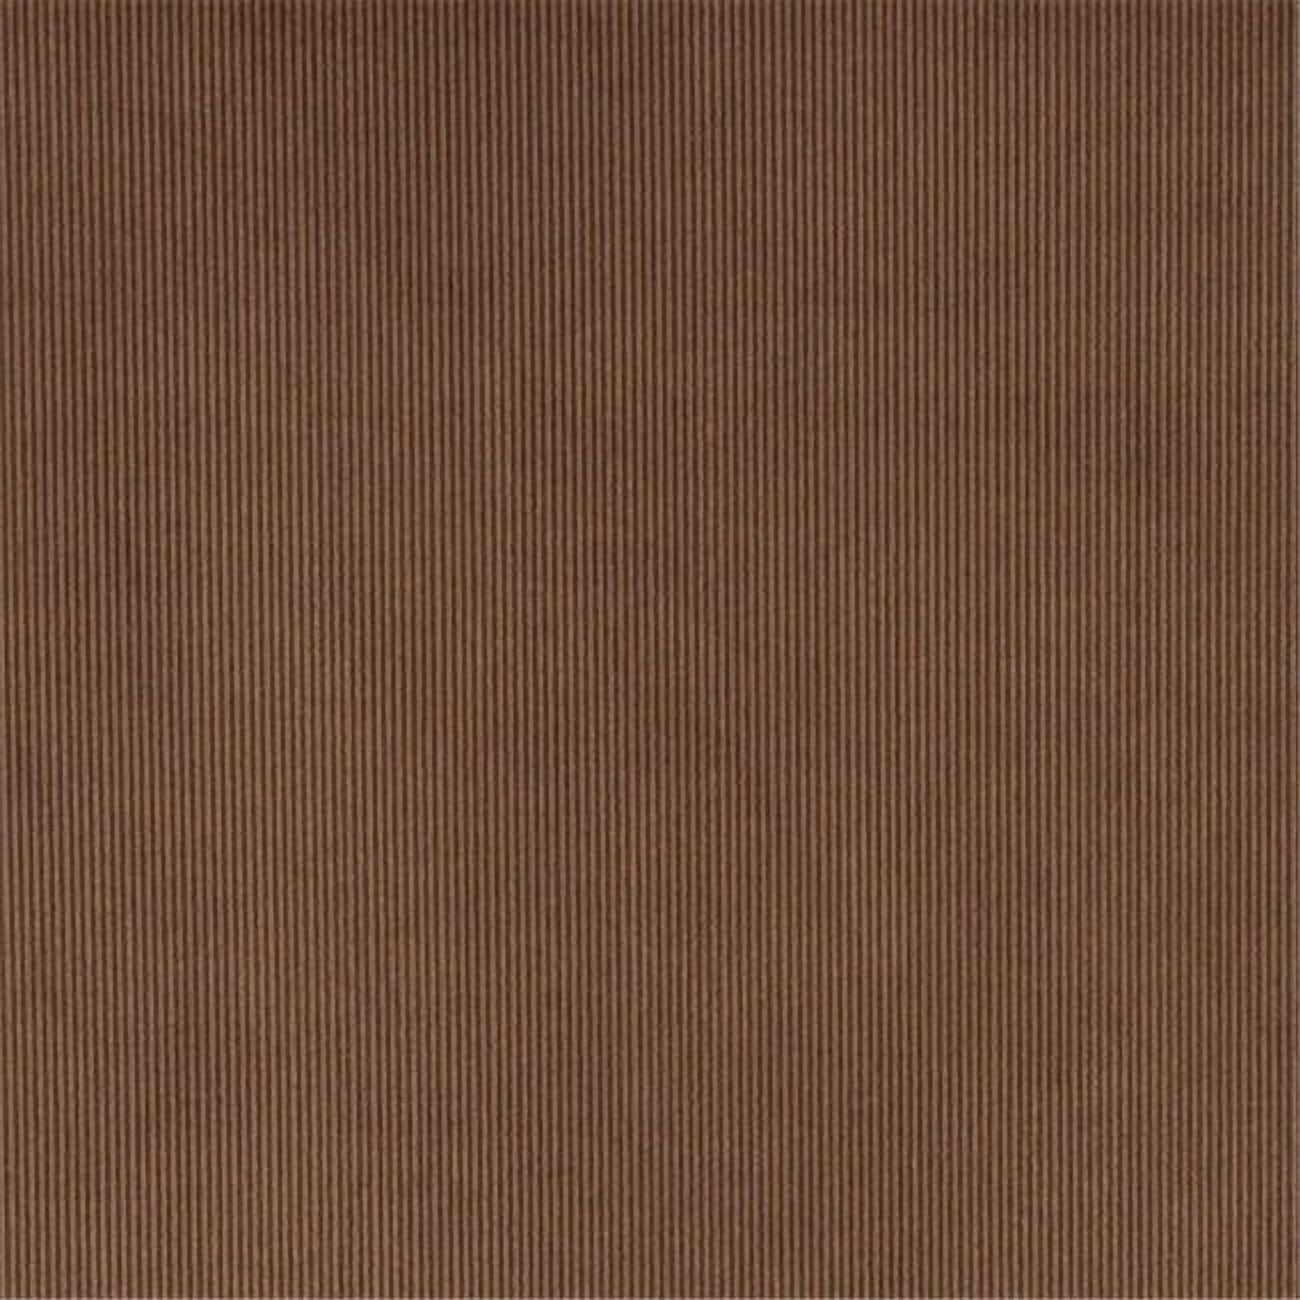 Mink Brown Corduroy Upholstery Fabric, 54 Wide, By the Yard